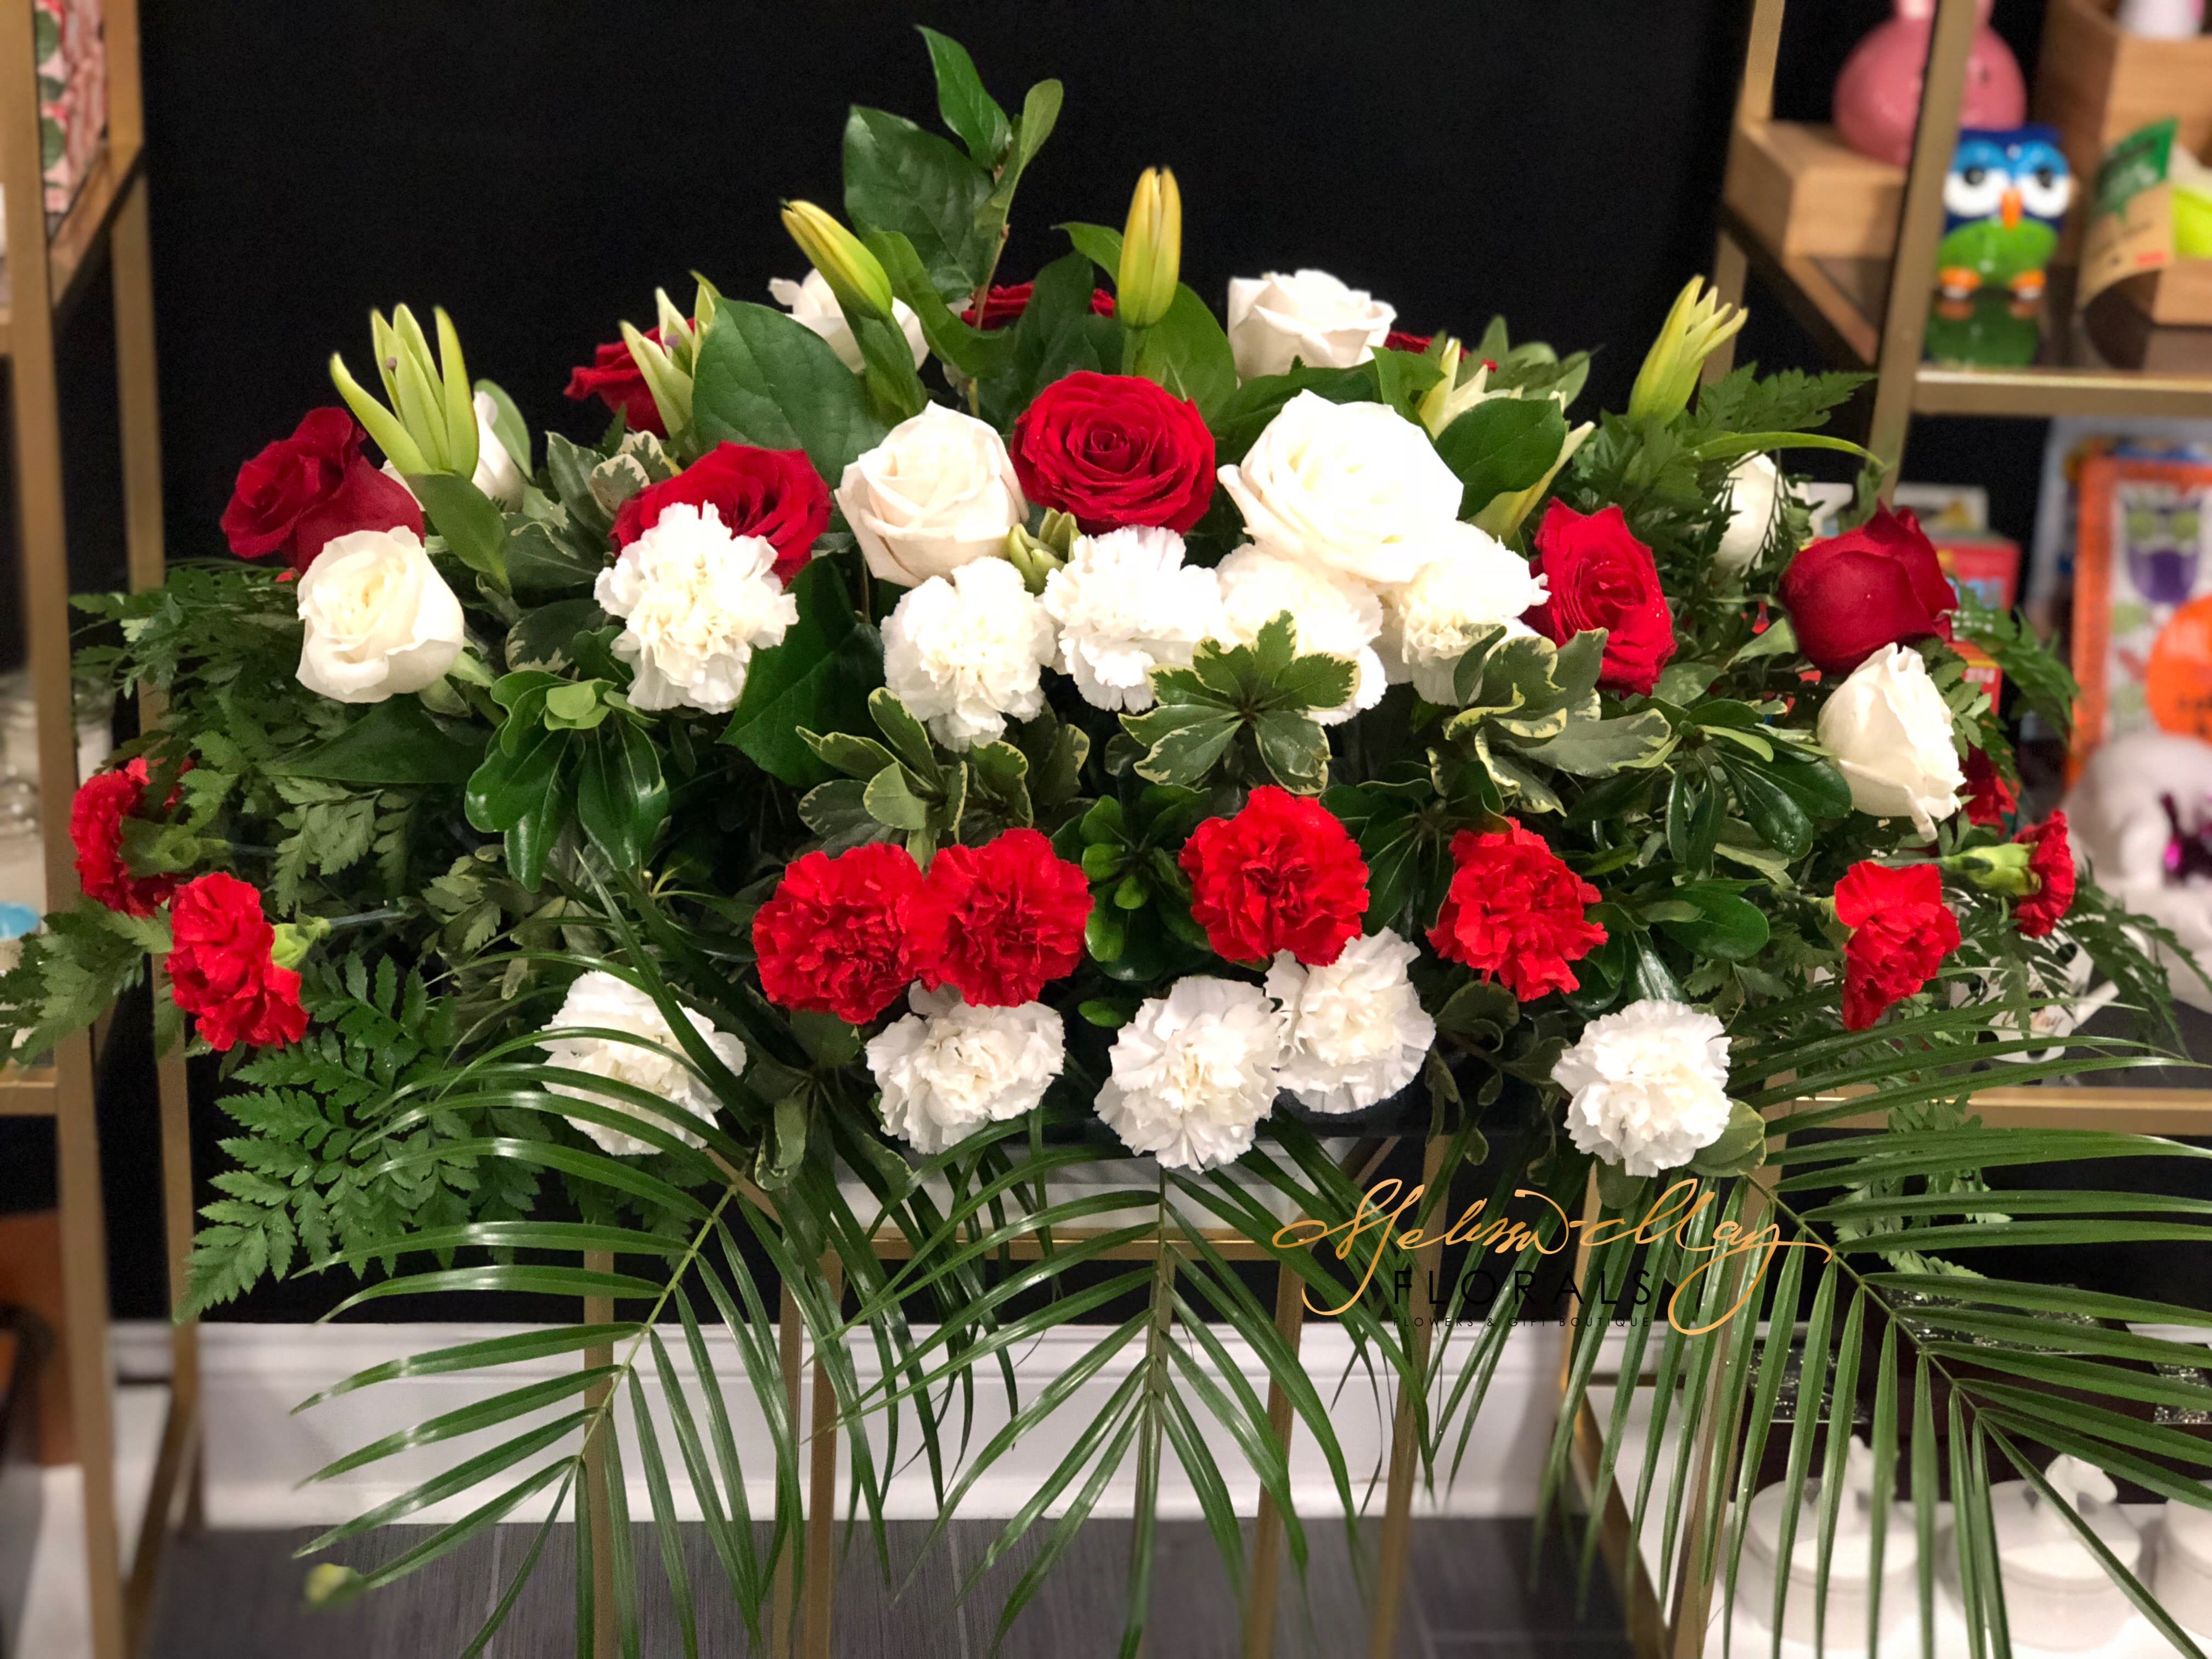 Garden of Home - The garden of where home is and you never want to go anywhere else. You will not be disappointed with this to celebrate someone home going. A spray filled with red and white roses/ carnations as well as lilies on top. 